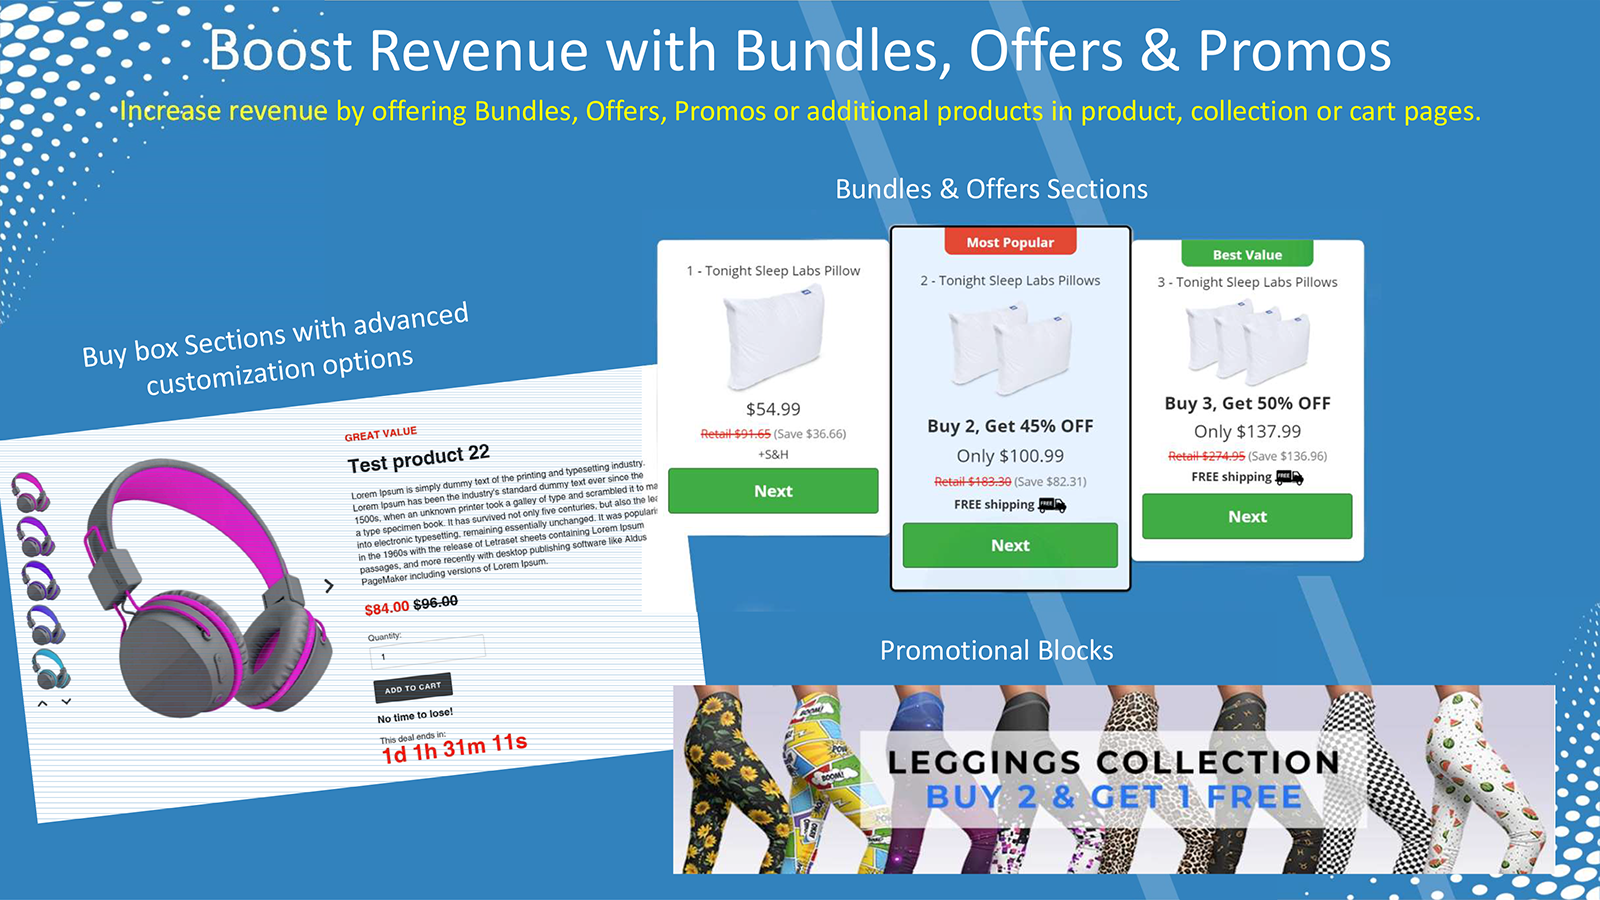 Boost Revenue with Bundles, Offers & Promos